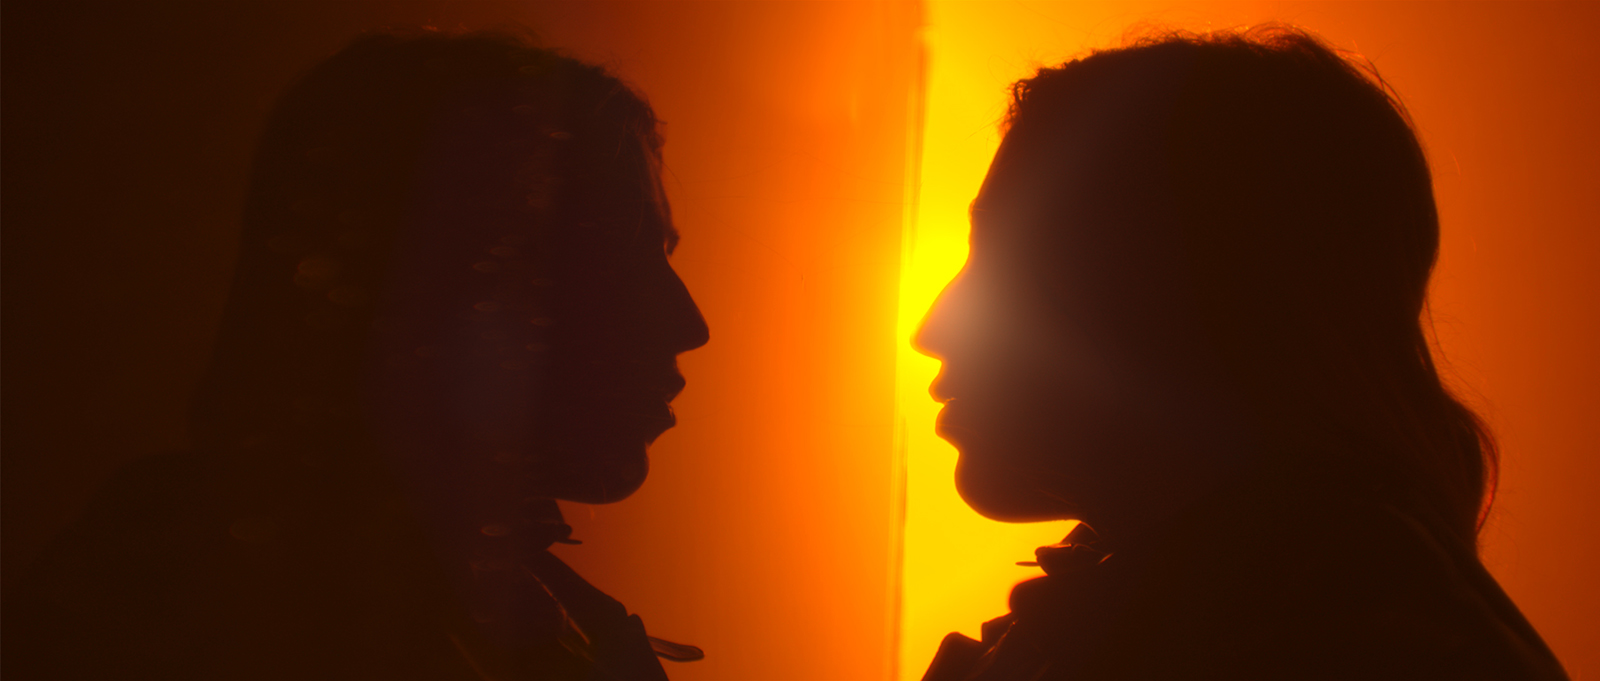 Still from the film Ningyo. Valentina is in silhouette, looking at her own reflection in a body of water. There's beautiful orange light behind her.